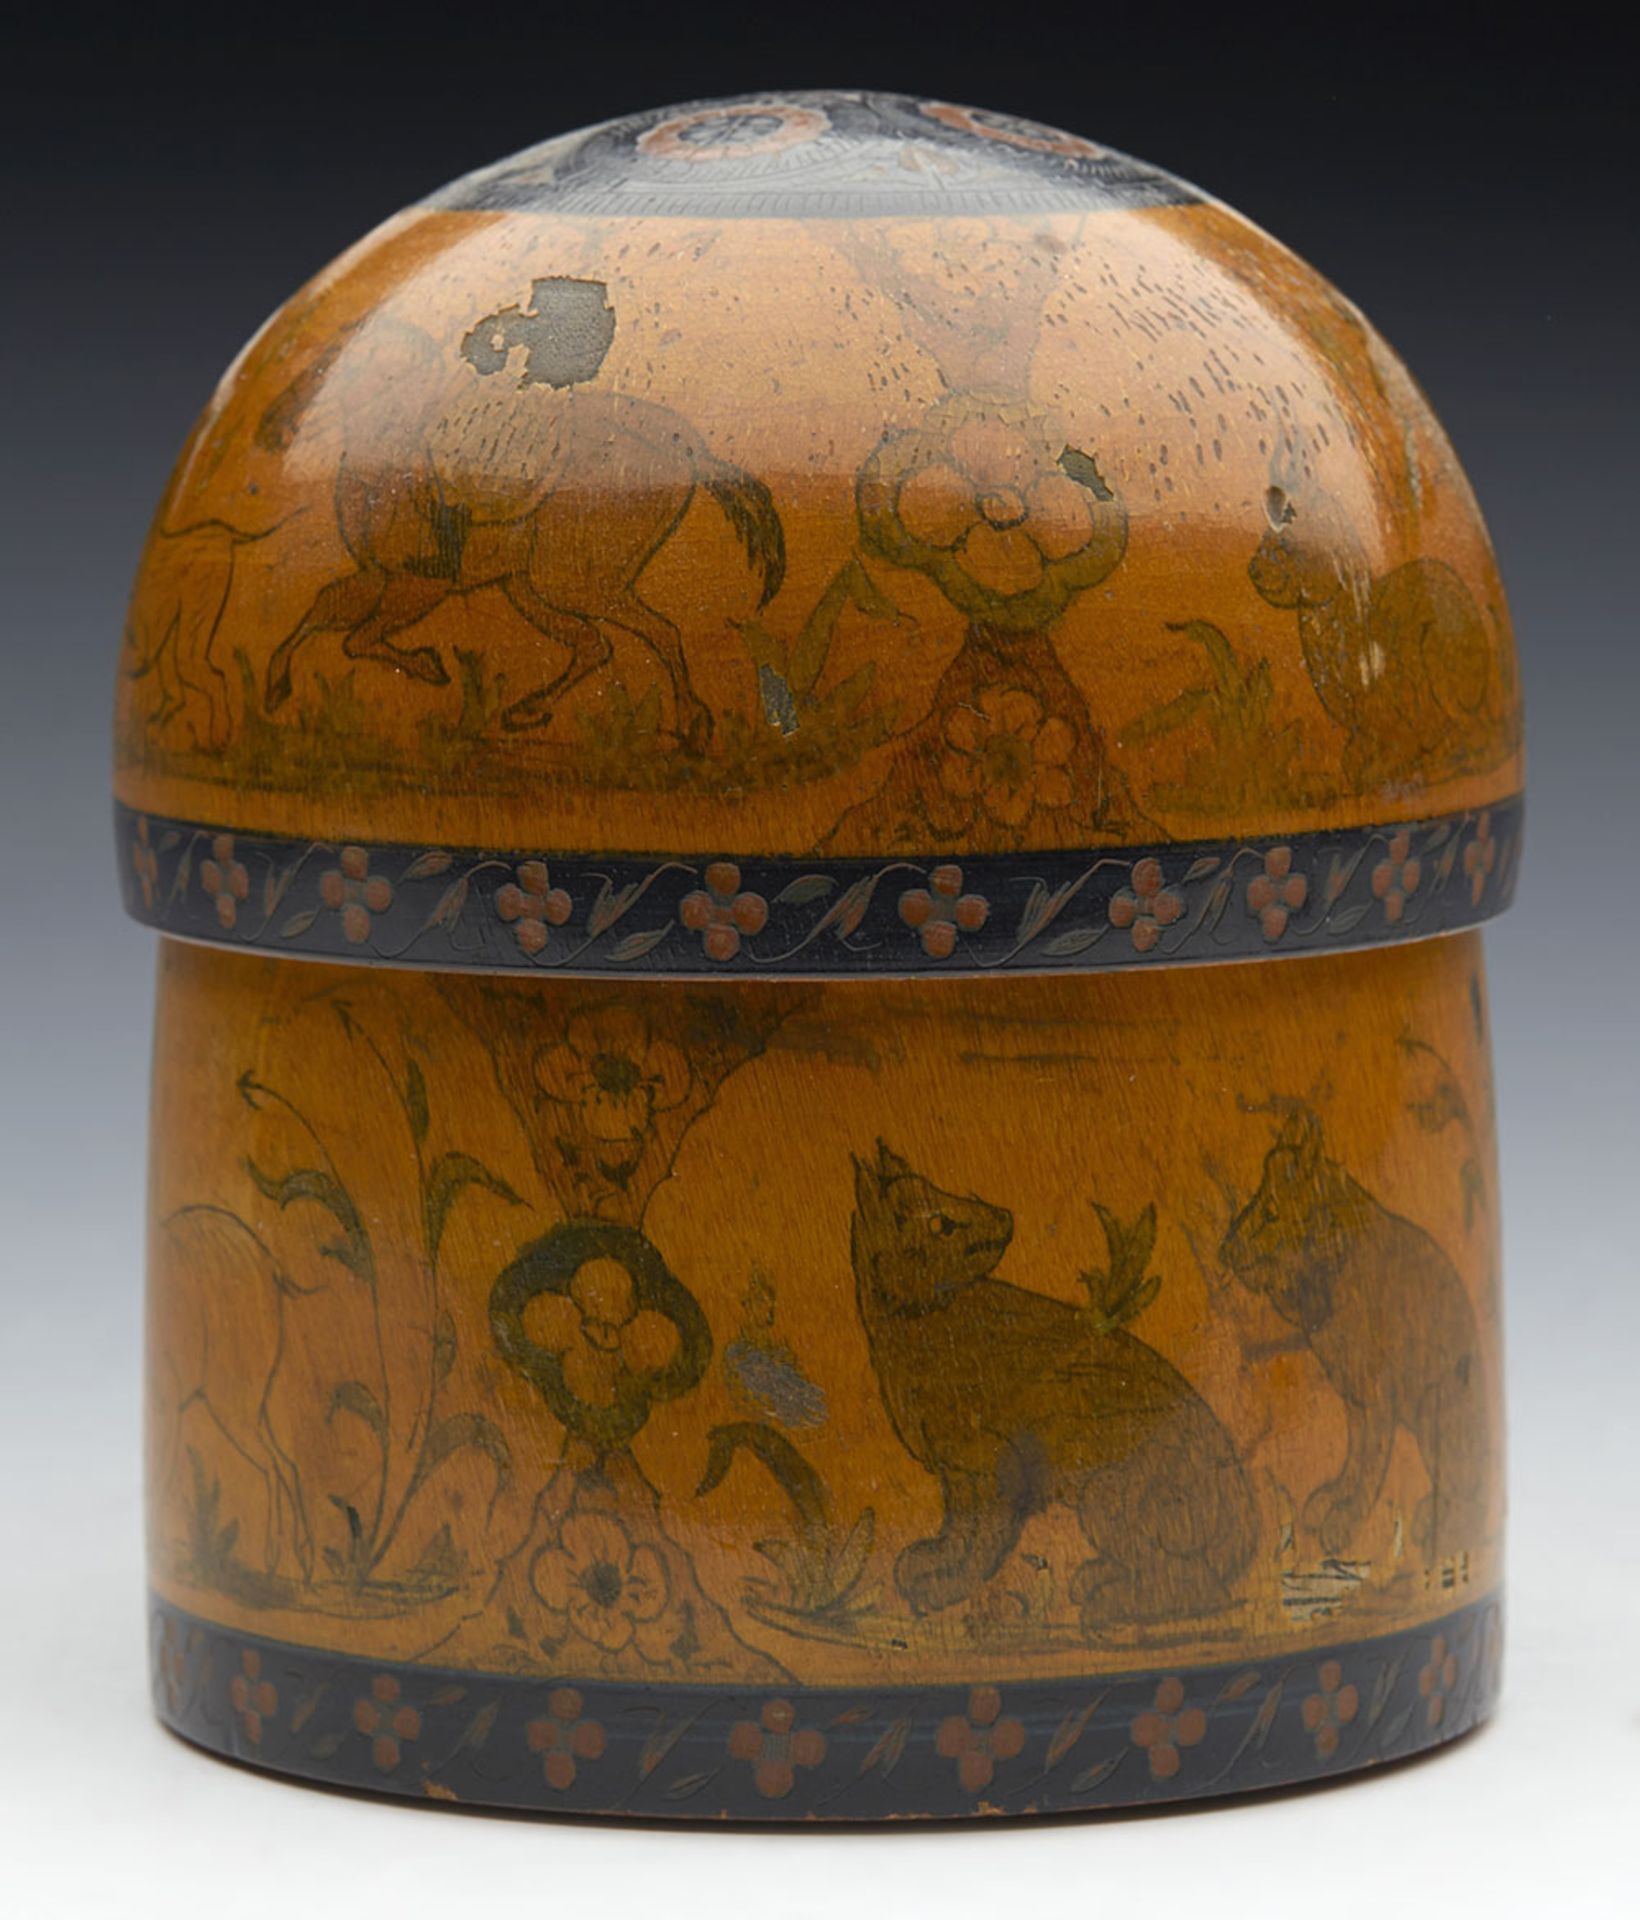 ANTIQUE INDIAN WOODEN LIDDED JAR PAINTED WITH ANIMALS & FIGURES 19TH C. - Image 6 of 10